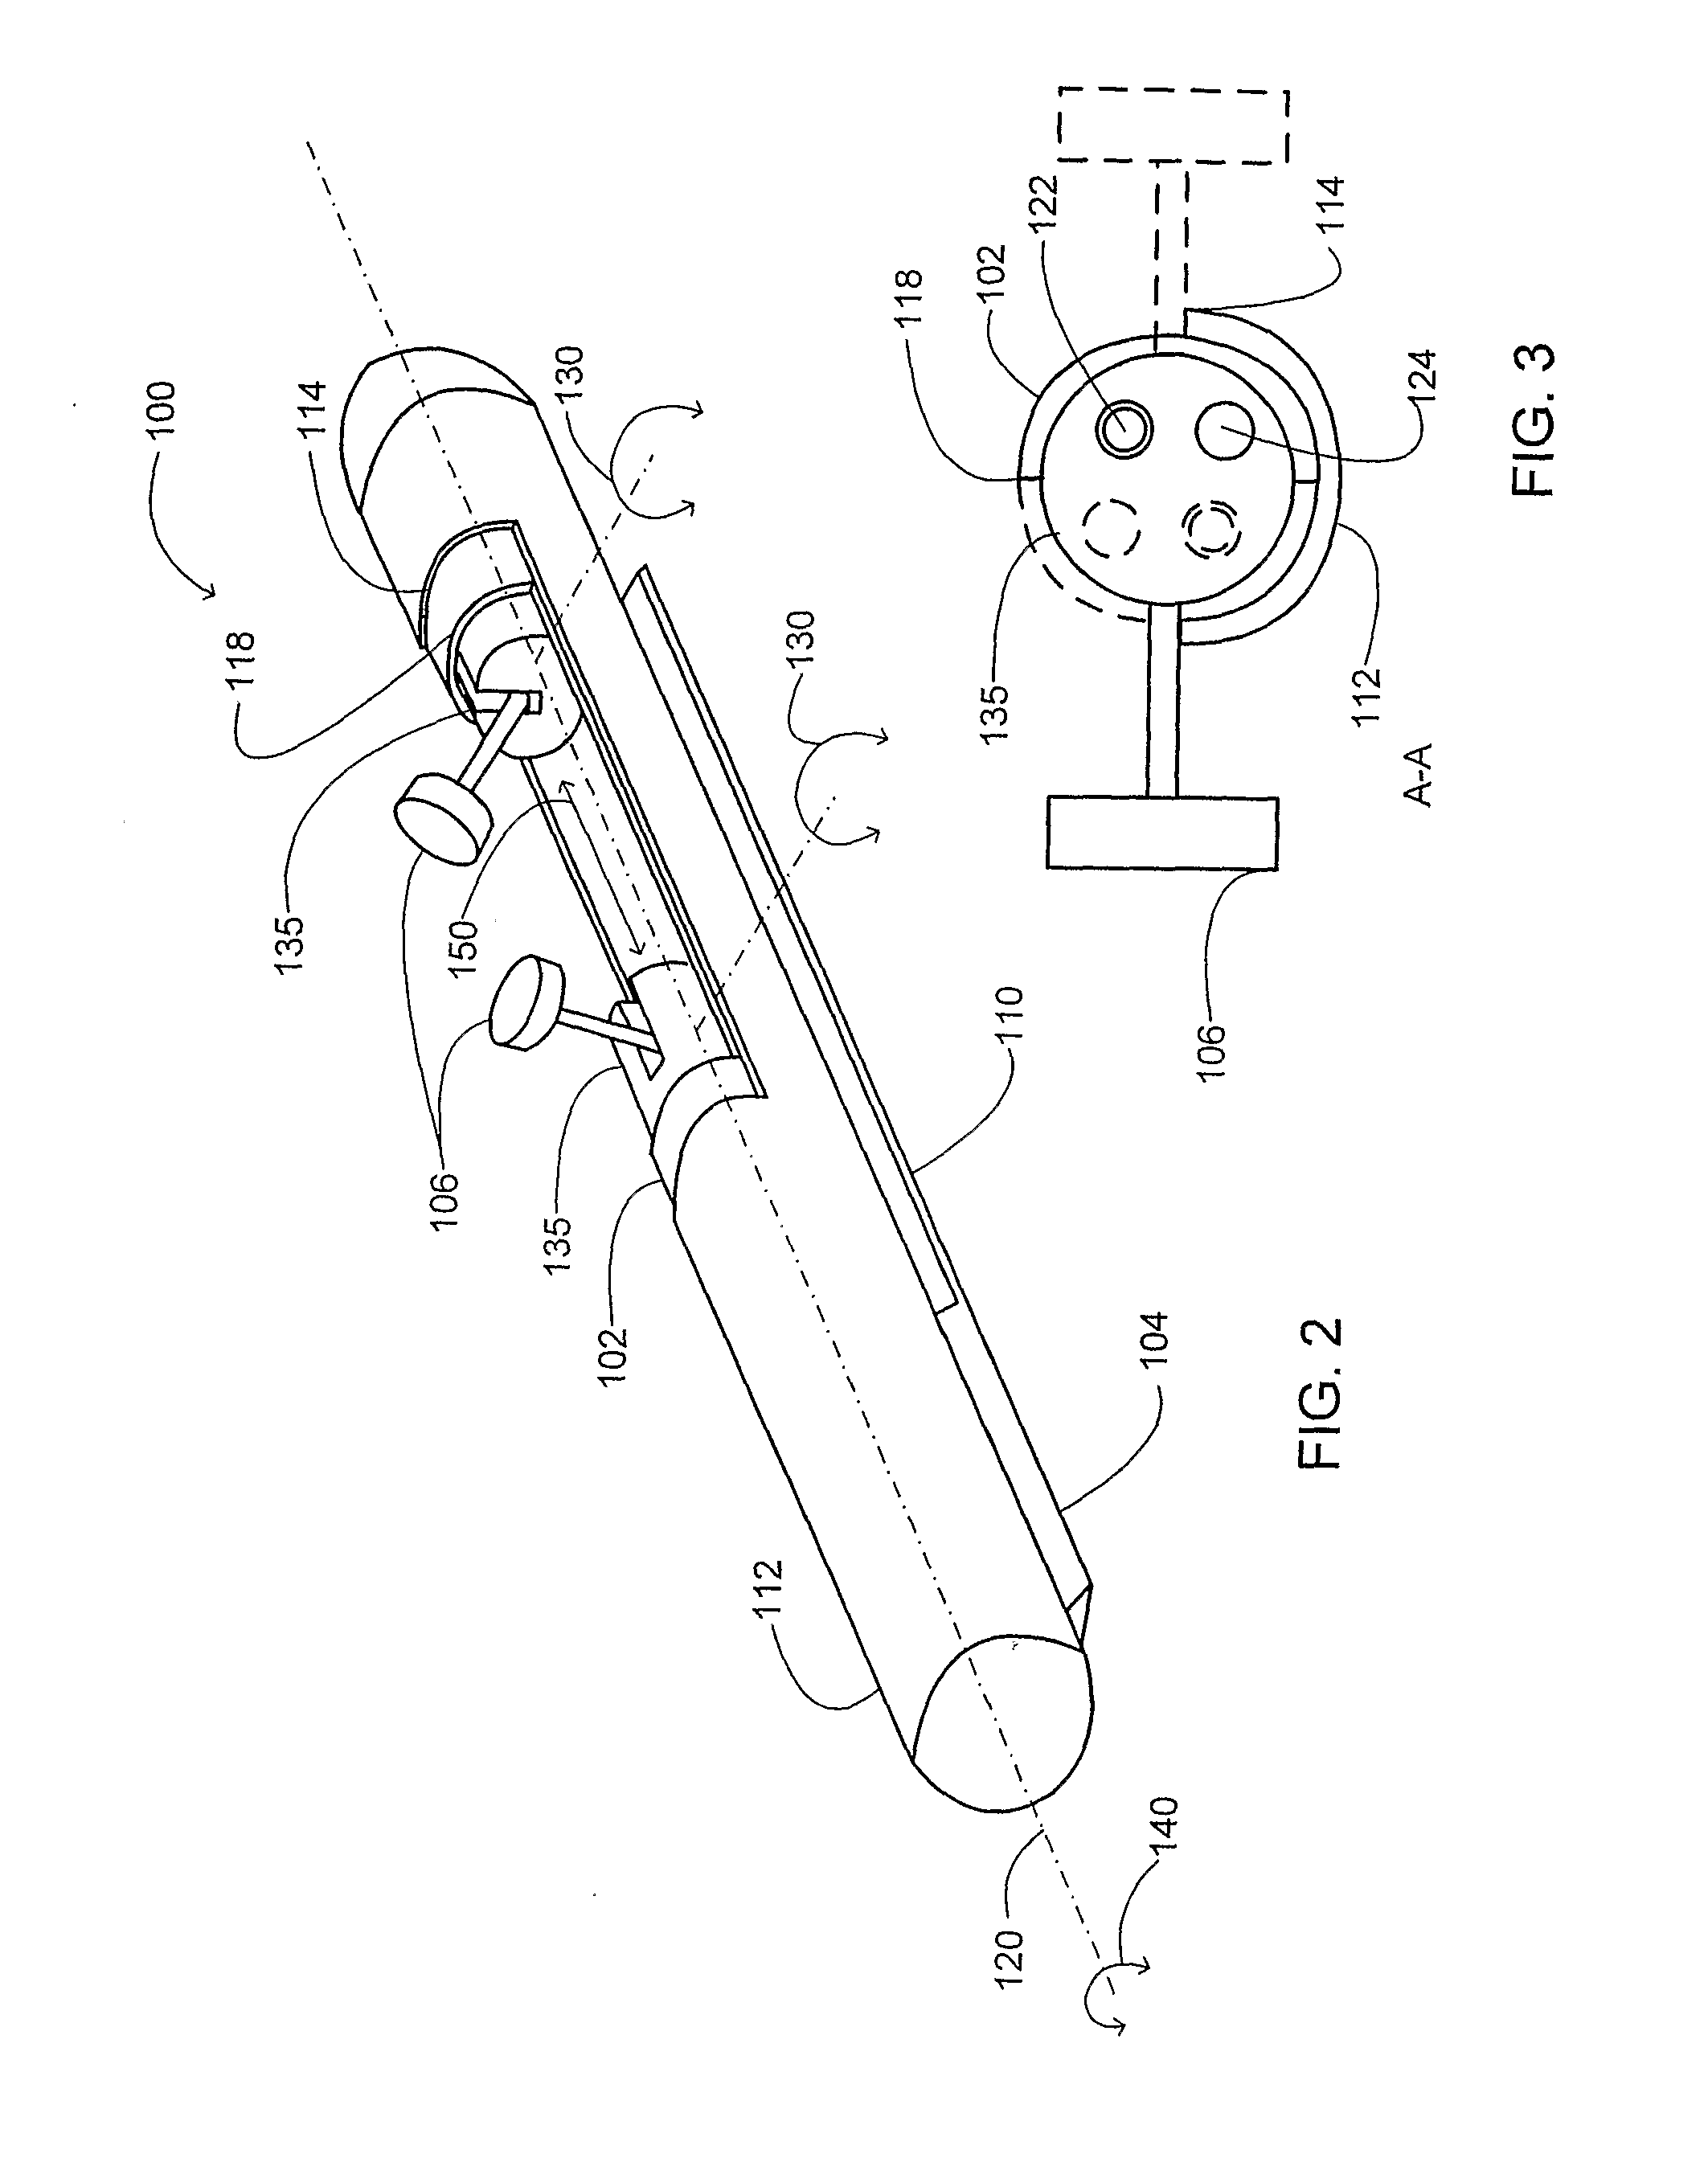 Insertable Device and System For Minimal Access Procedure